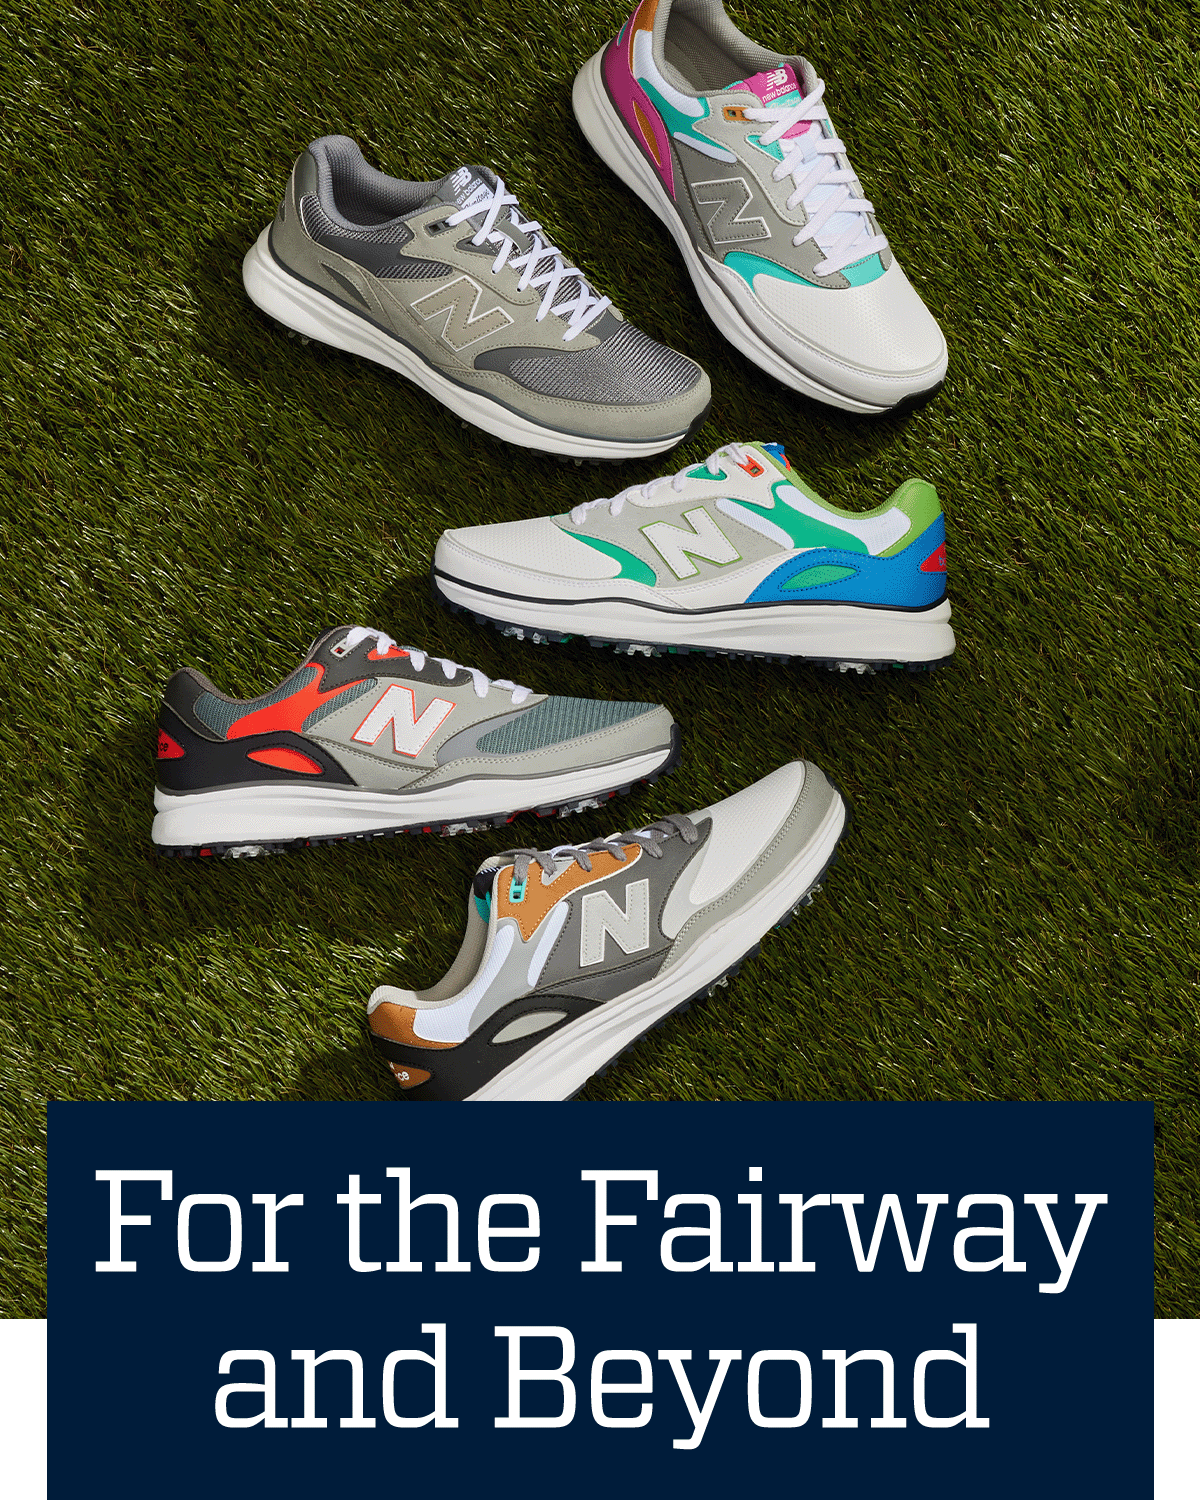 \xa0For the fairway and beyond.